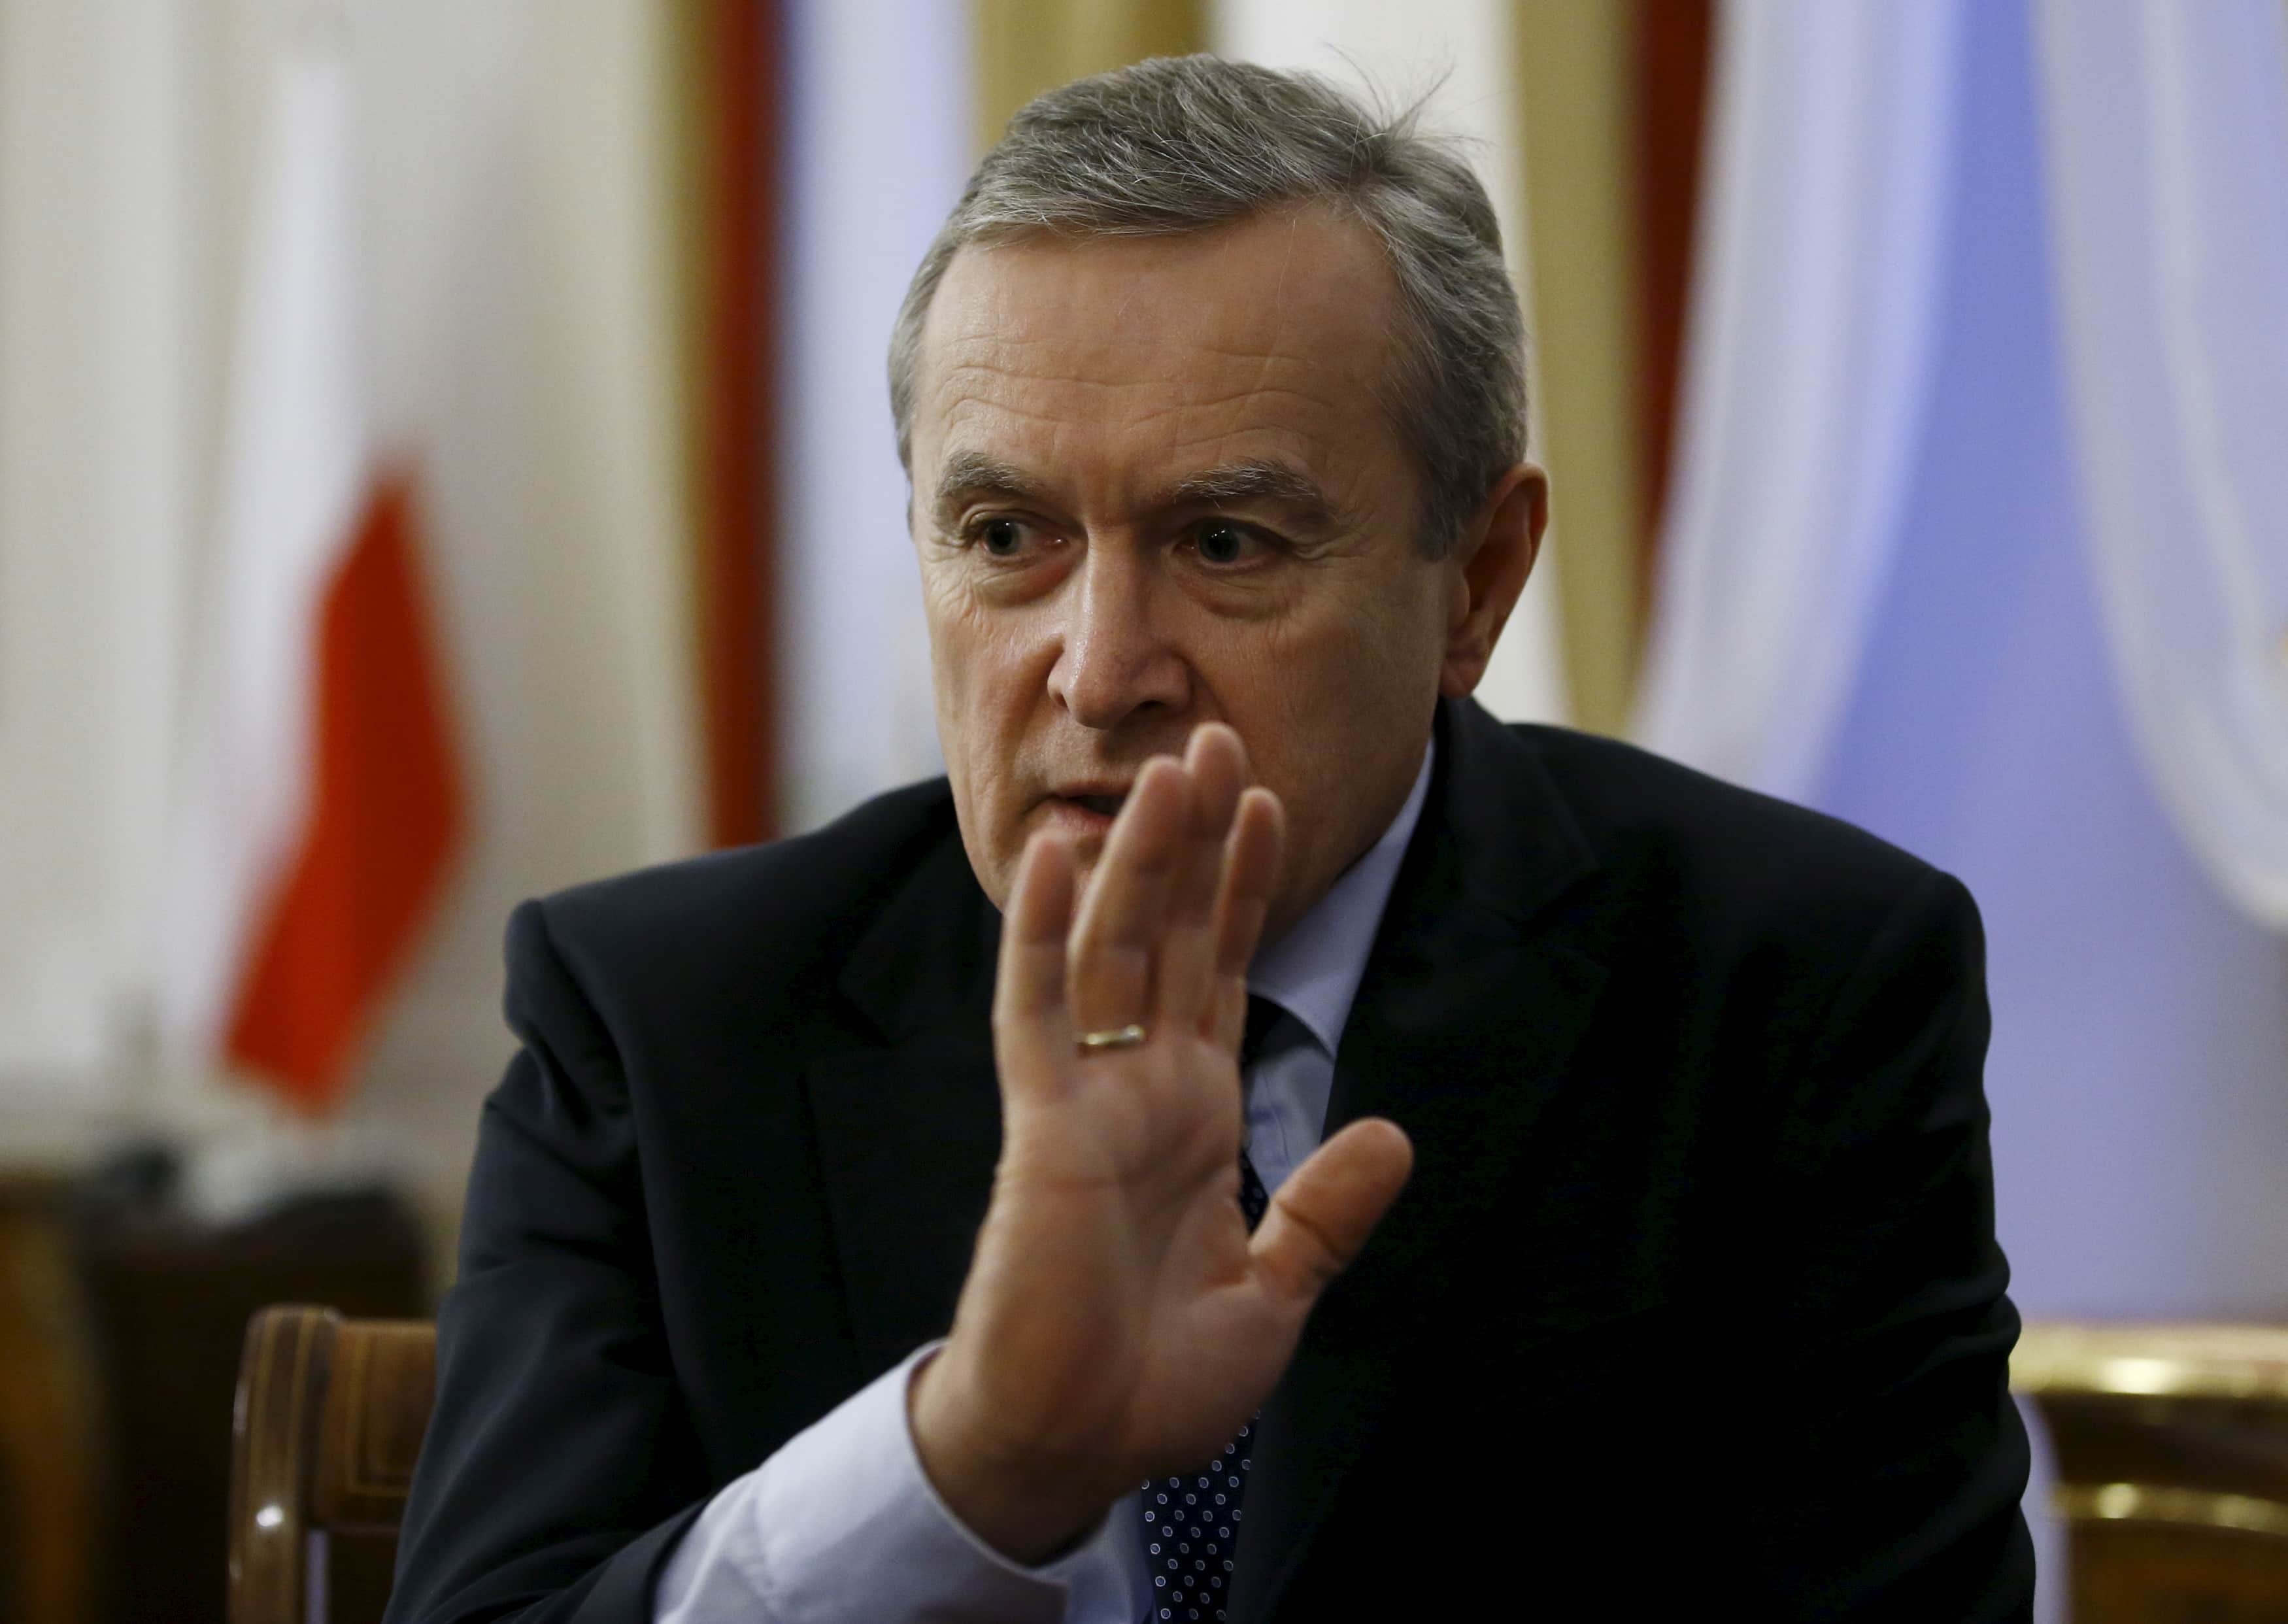 Poland's deputy prime minister and minister of culture Piotr Glinski gestures during interview with Reuters in his office in Warsaw, 30 November 2015, REUTERS/Kacper Pempel